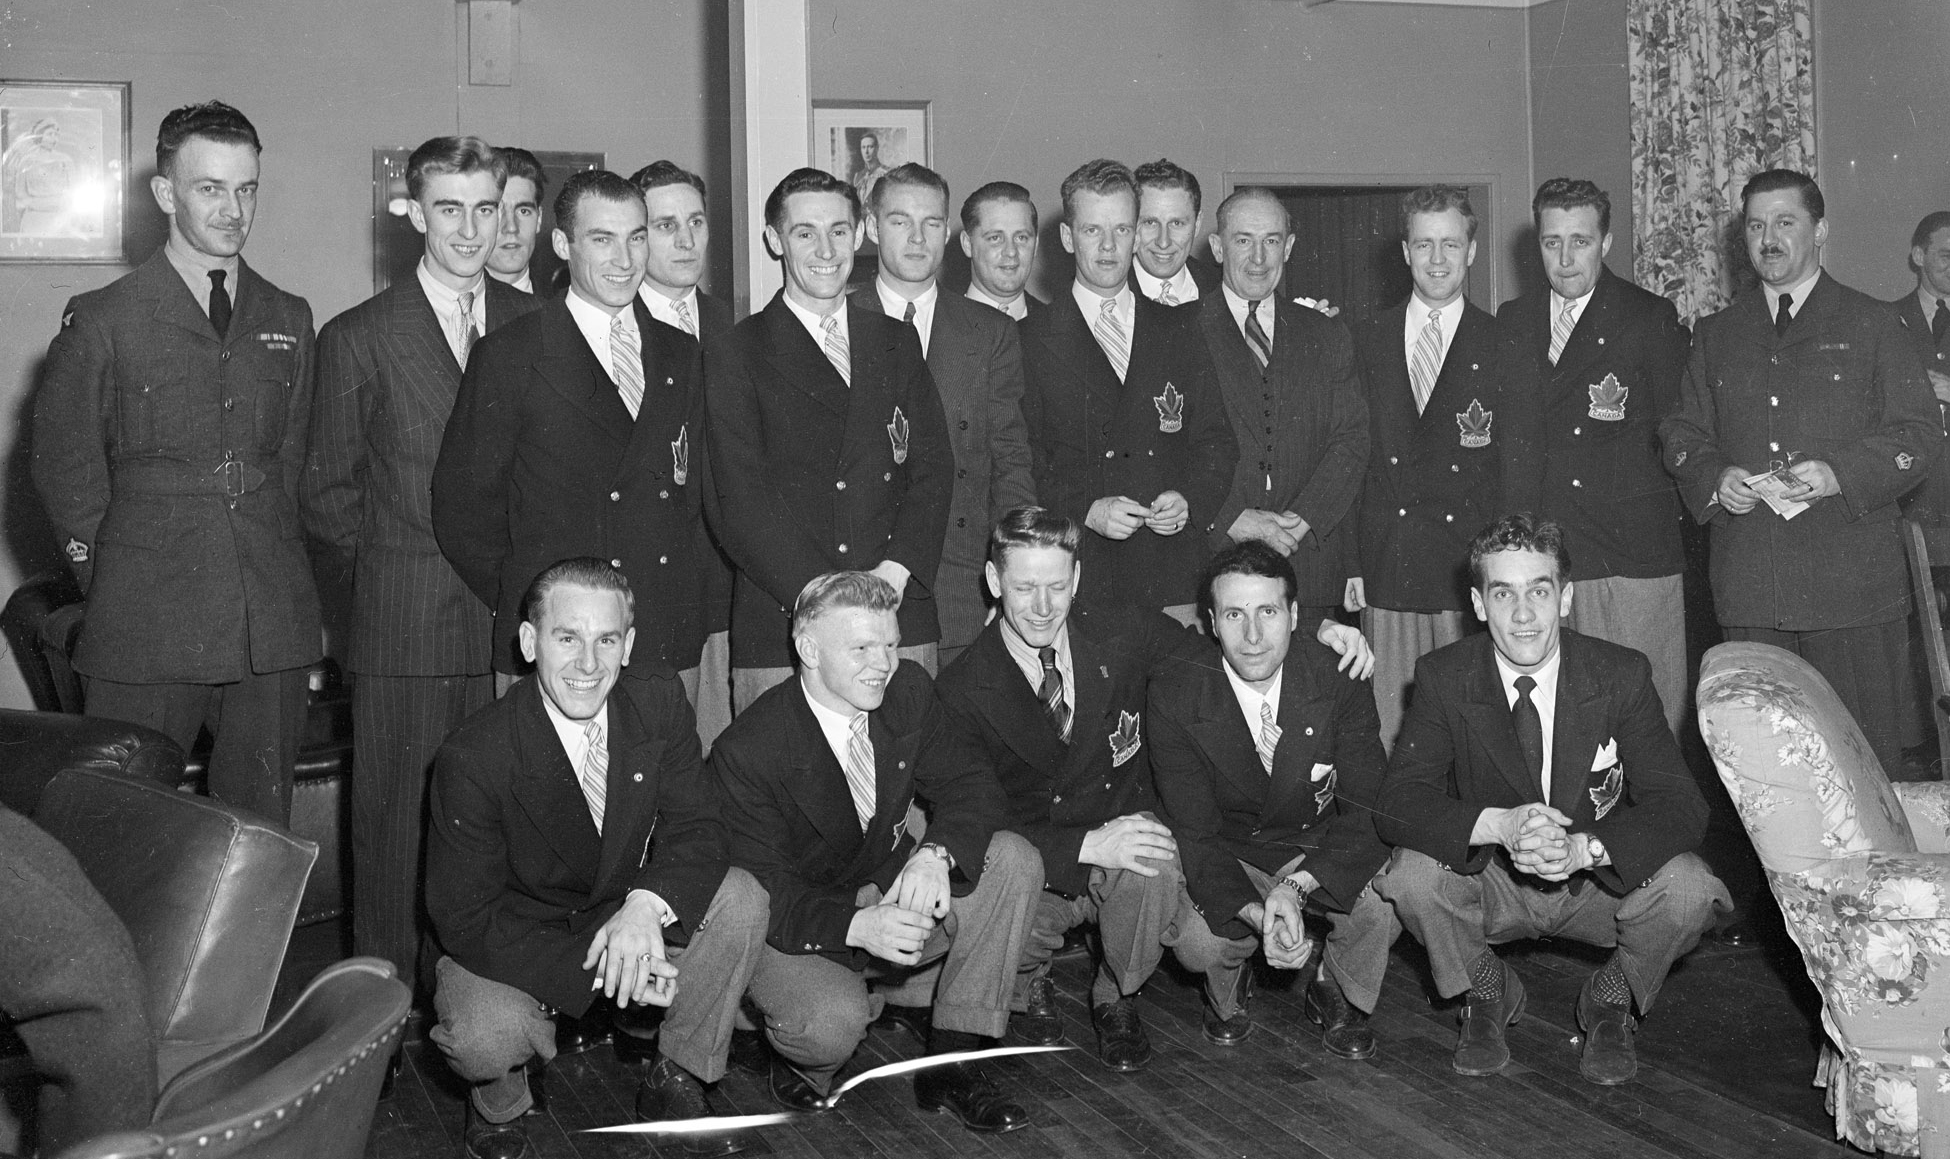 The Olympic Champions, RCAF Flyers, received a tremendous ovation onThursday, April 8, 1948, at the Sergeant's Mess located in Ottawa's Beaver Barracks. Front row (left to right): Reg Schroeter, Orval Gravelle, Roy Forbes, Patsy Guzzo and Ted Hibbert. Standing (left to right): Warrant Officer Class 2 W.H. Fader, vice-president of the mess. Murray Dowey, Pete Lietchnitz, Hubert Brooks, Frank Dunster, Ab Renaud, George Mara, Louis LeCompte, Ross King, Sandy Watson, George "Buck" Boucher, Frank Boucher, Corporal George McFaul and Warrant Officer Class 2 Colin Campbell. Absent from the photo are André Laperrière and Wally Halder. PHOTO: DND